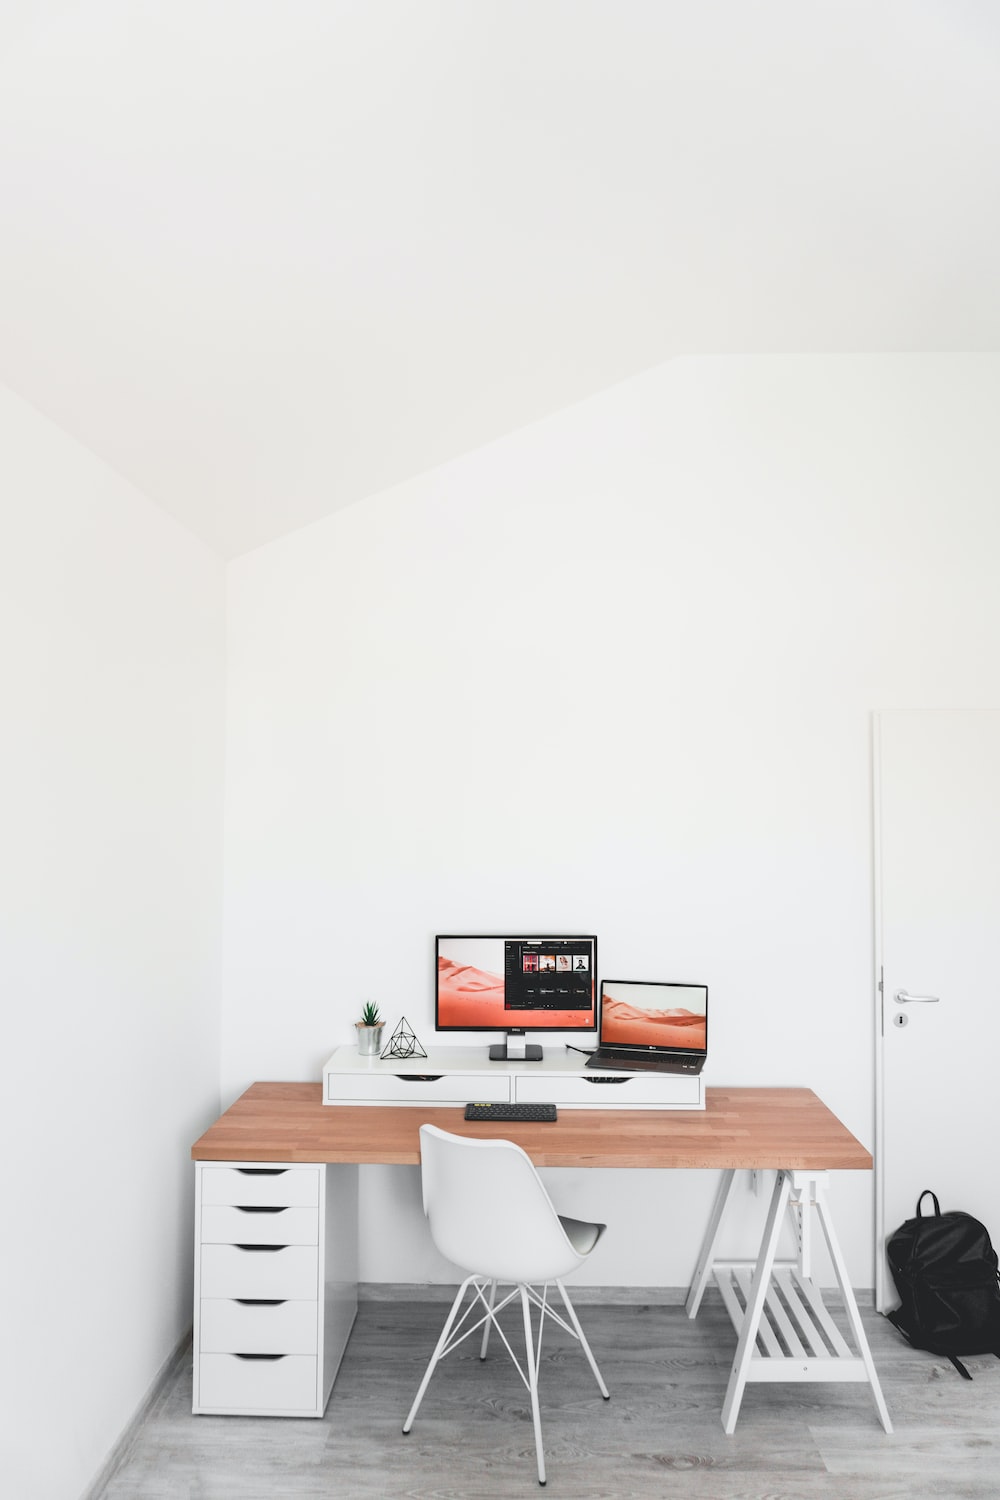 Where should a desk be placed at home?